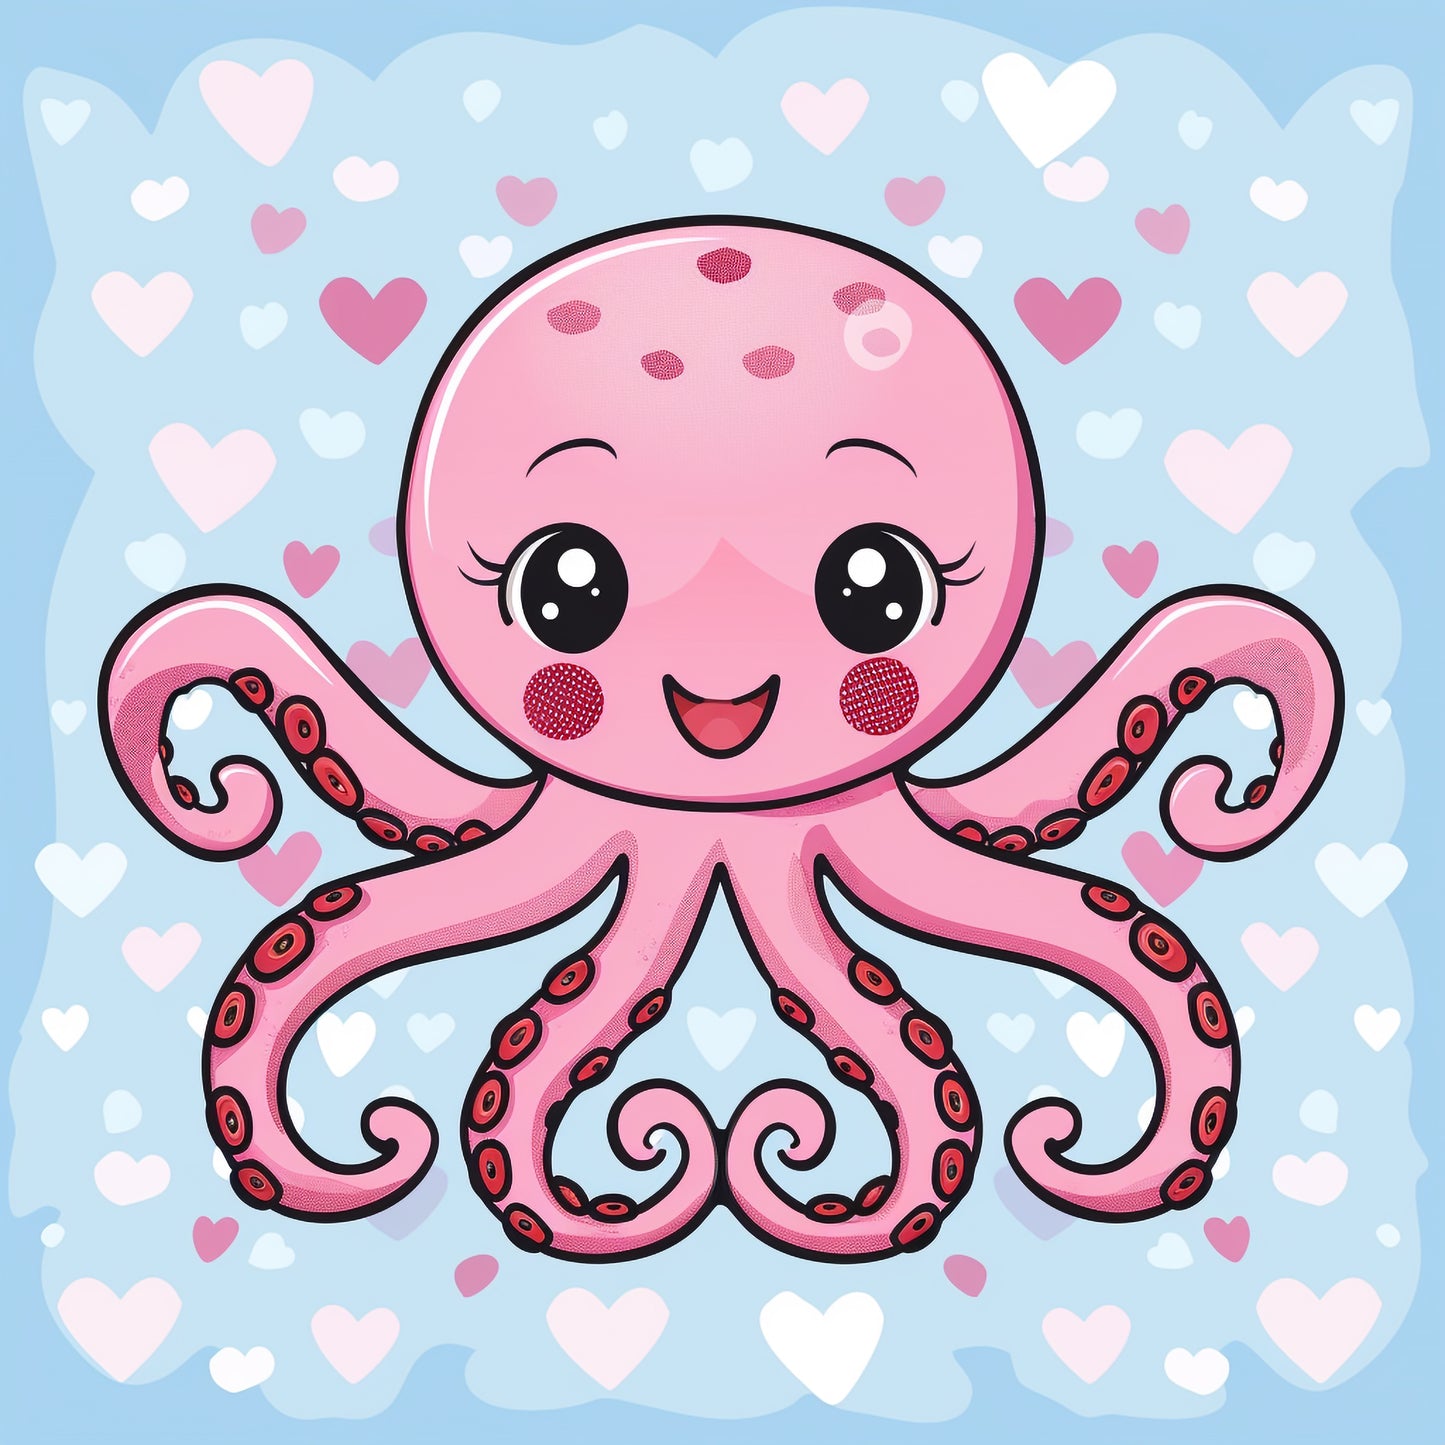 Cute Smiling Octopus Cartoon With Colorful Hearts